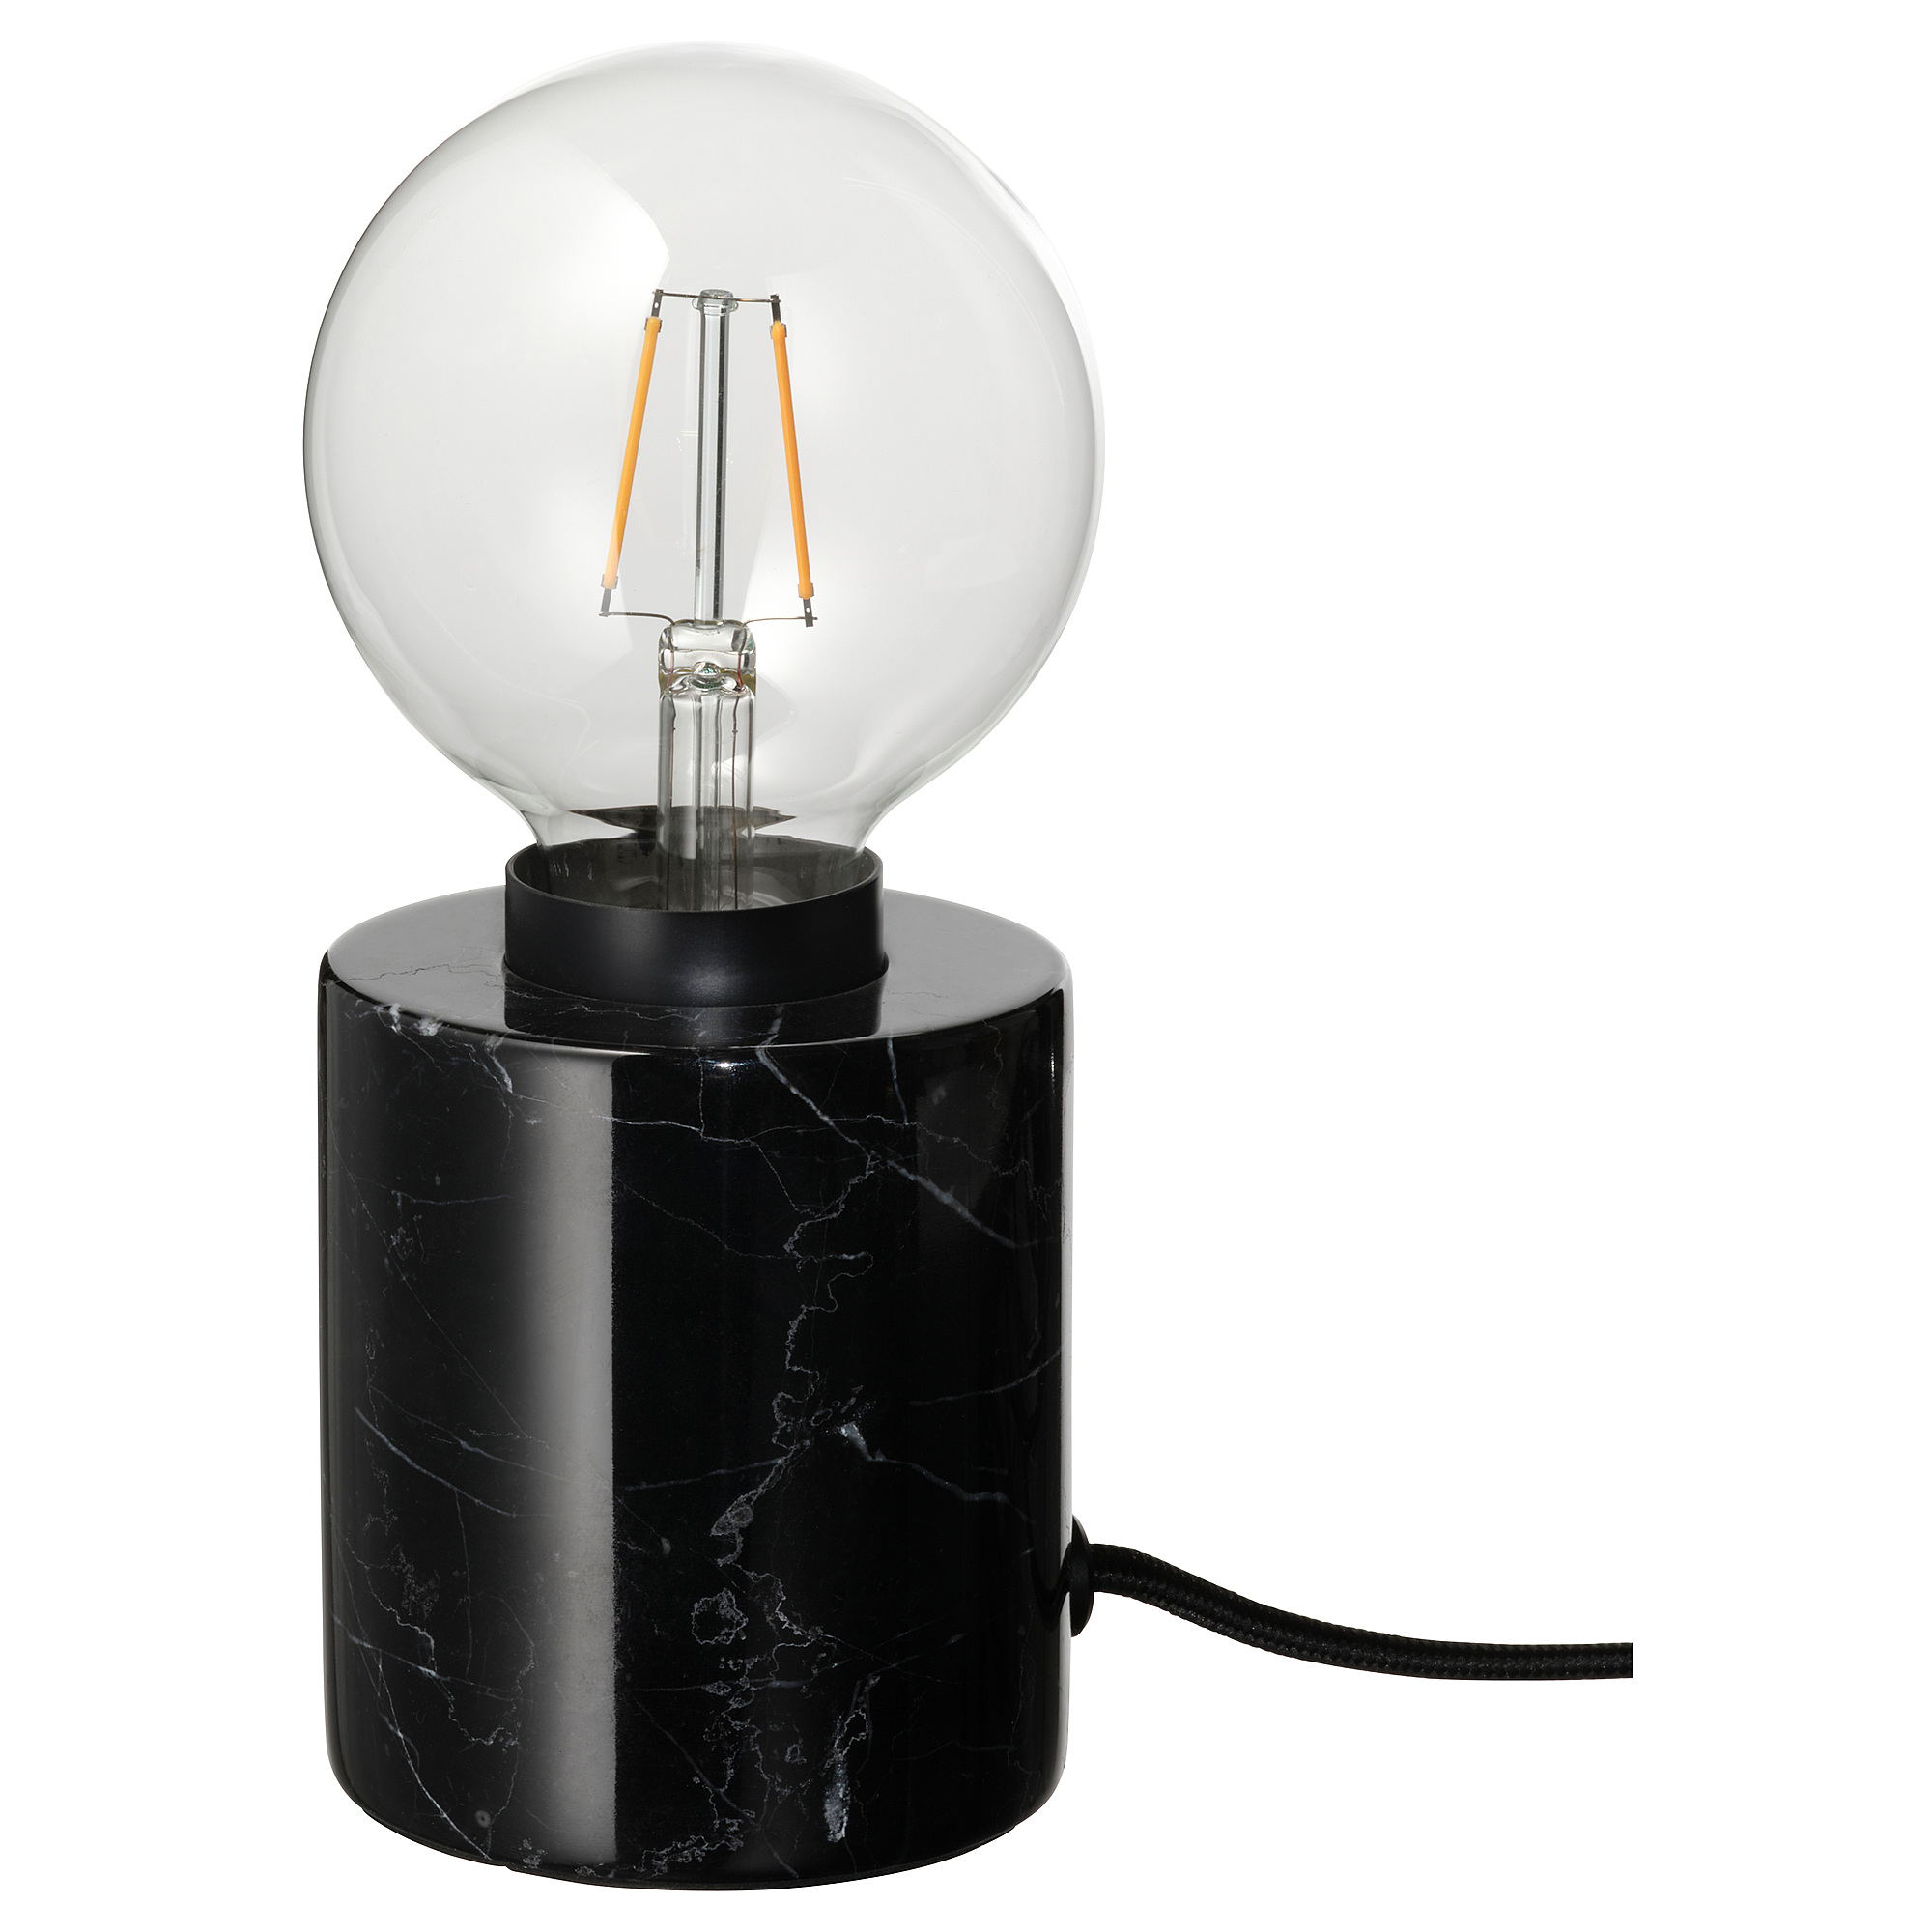 MARKFROST/LUNNOM table lamp with light bulb